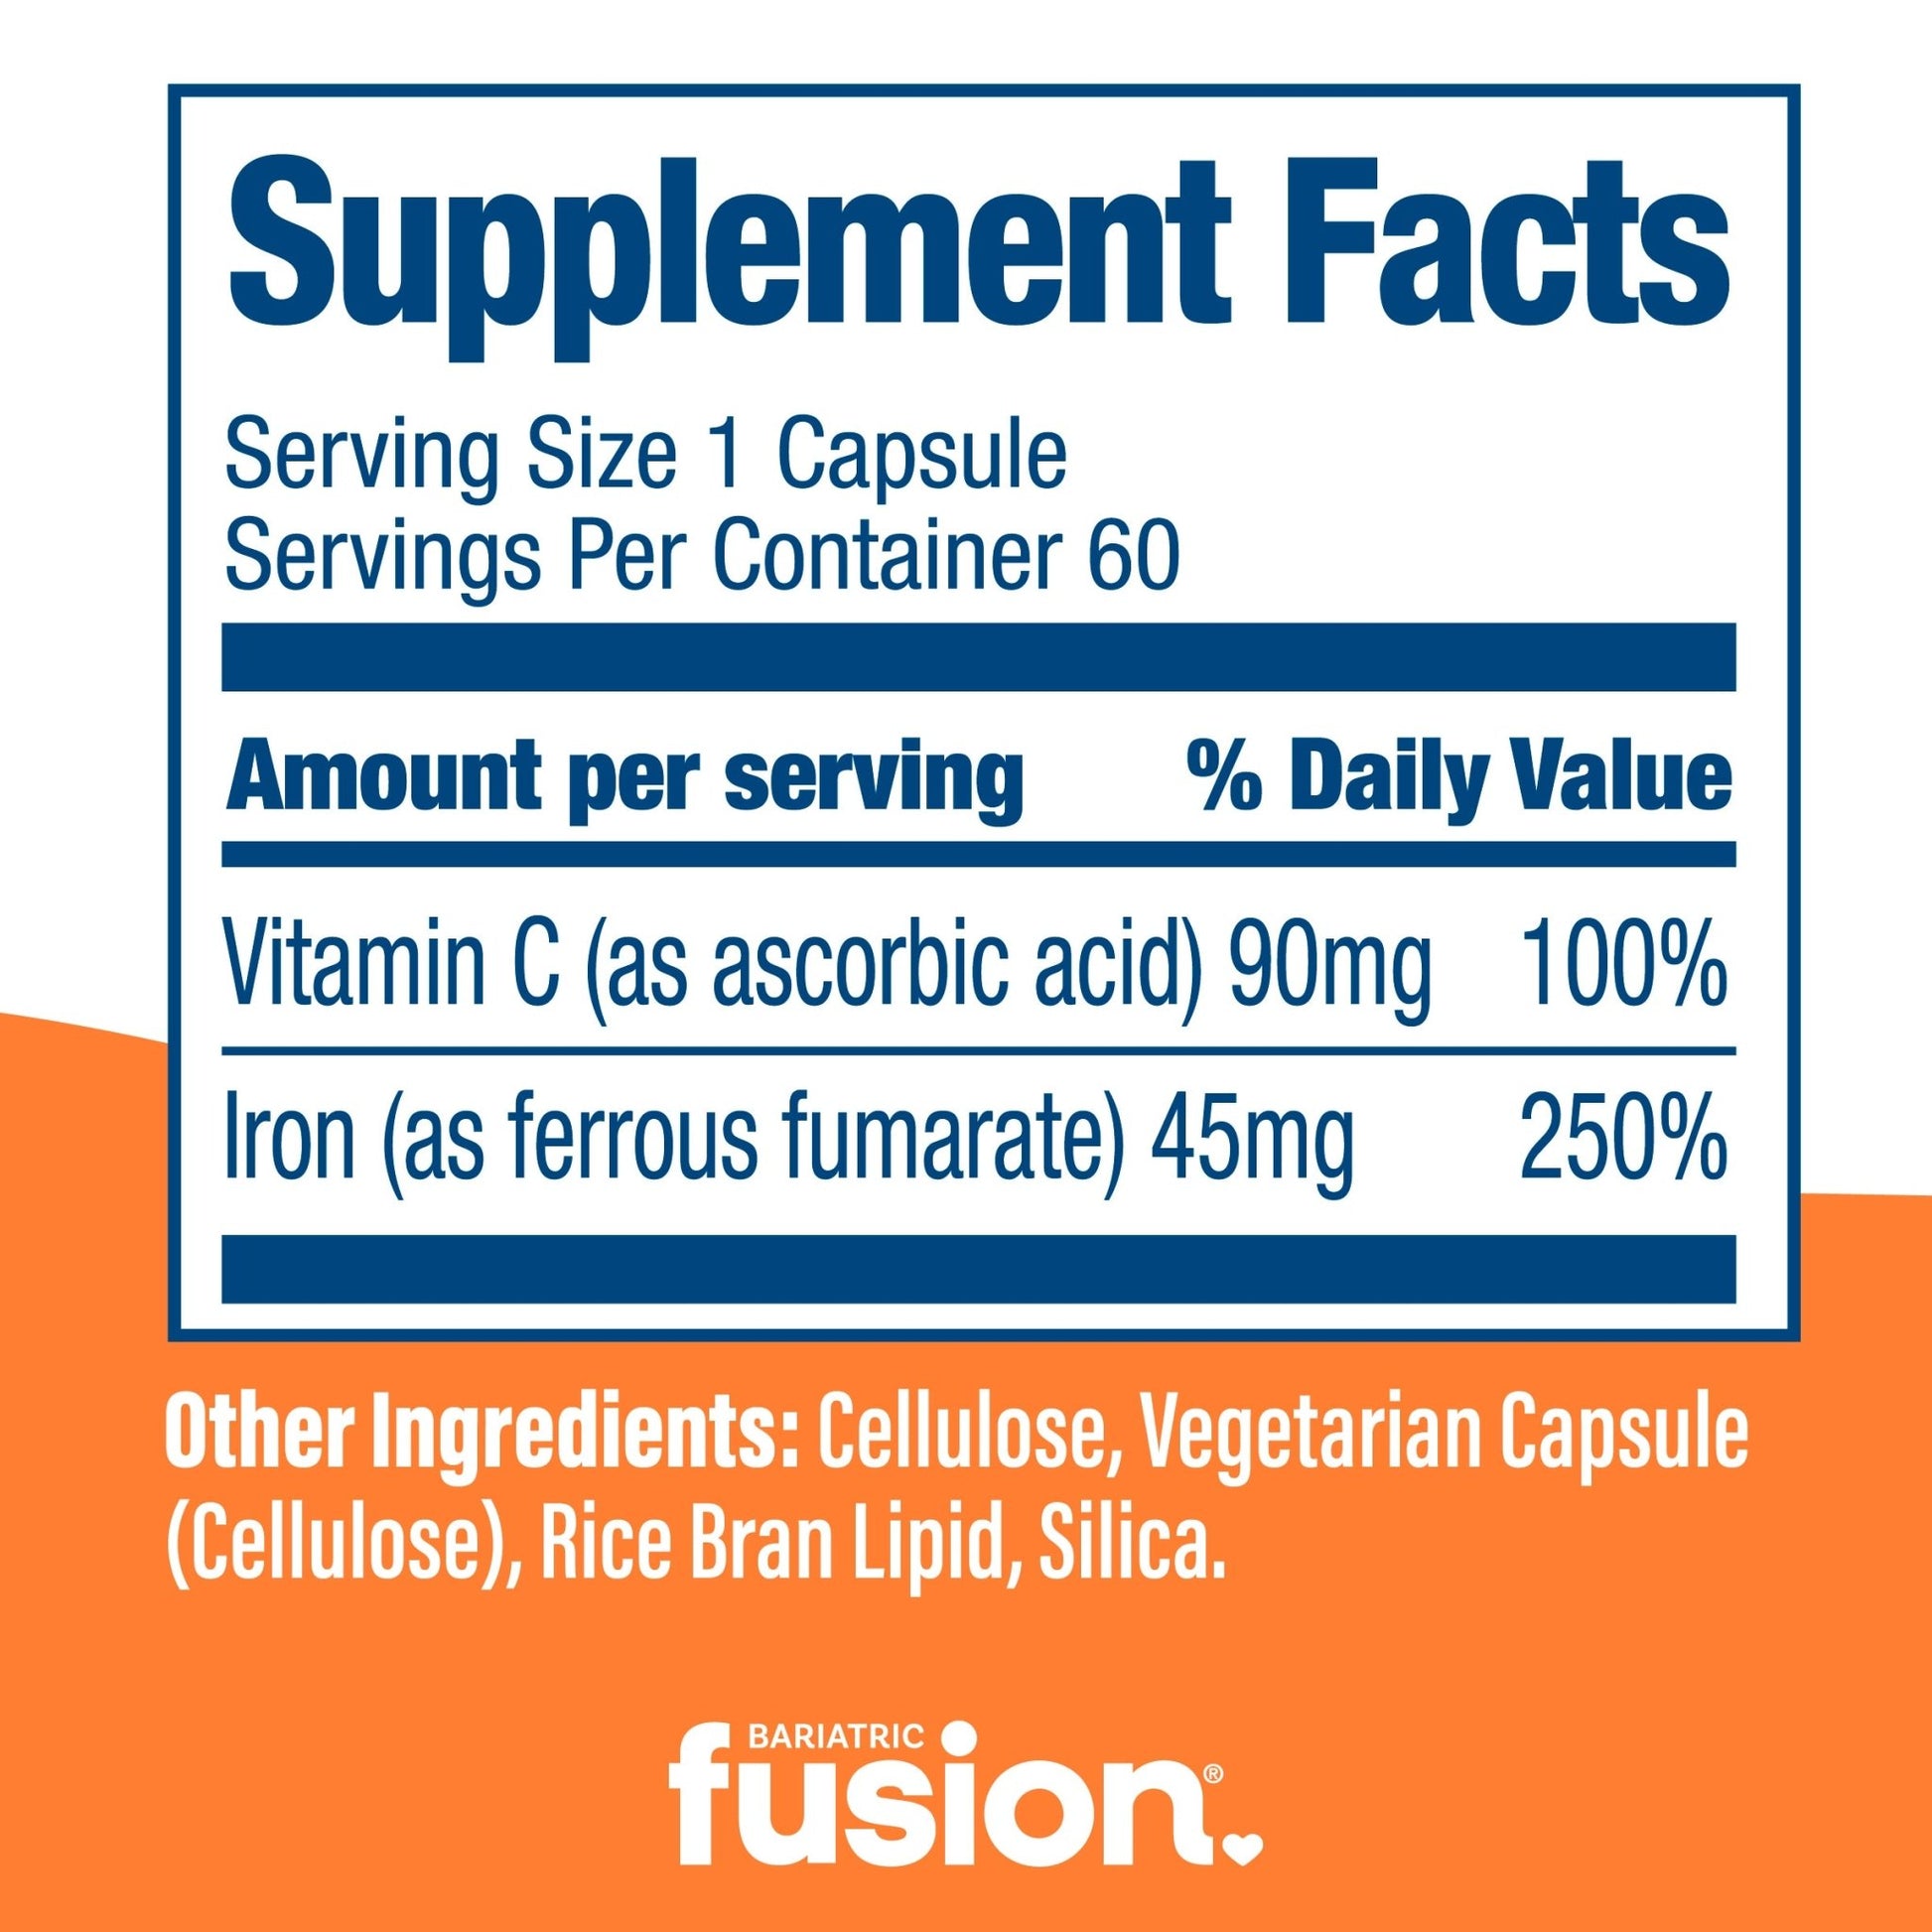 Bariatric Iron Capsule with Vitamin C 60mg Iron supplement facts.